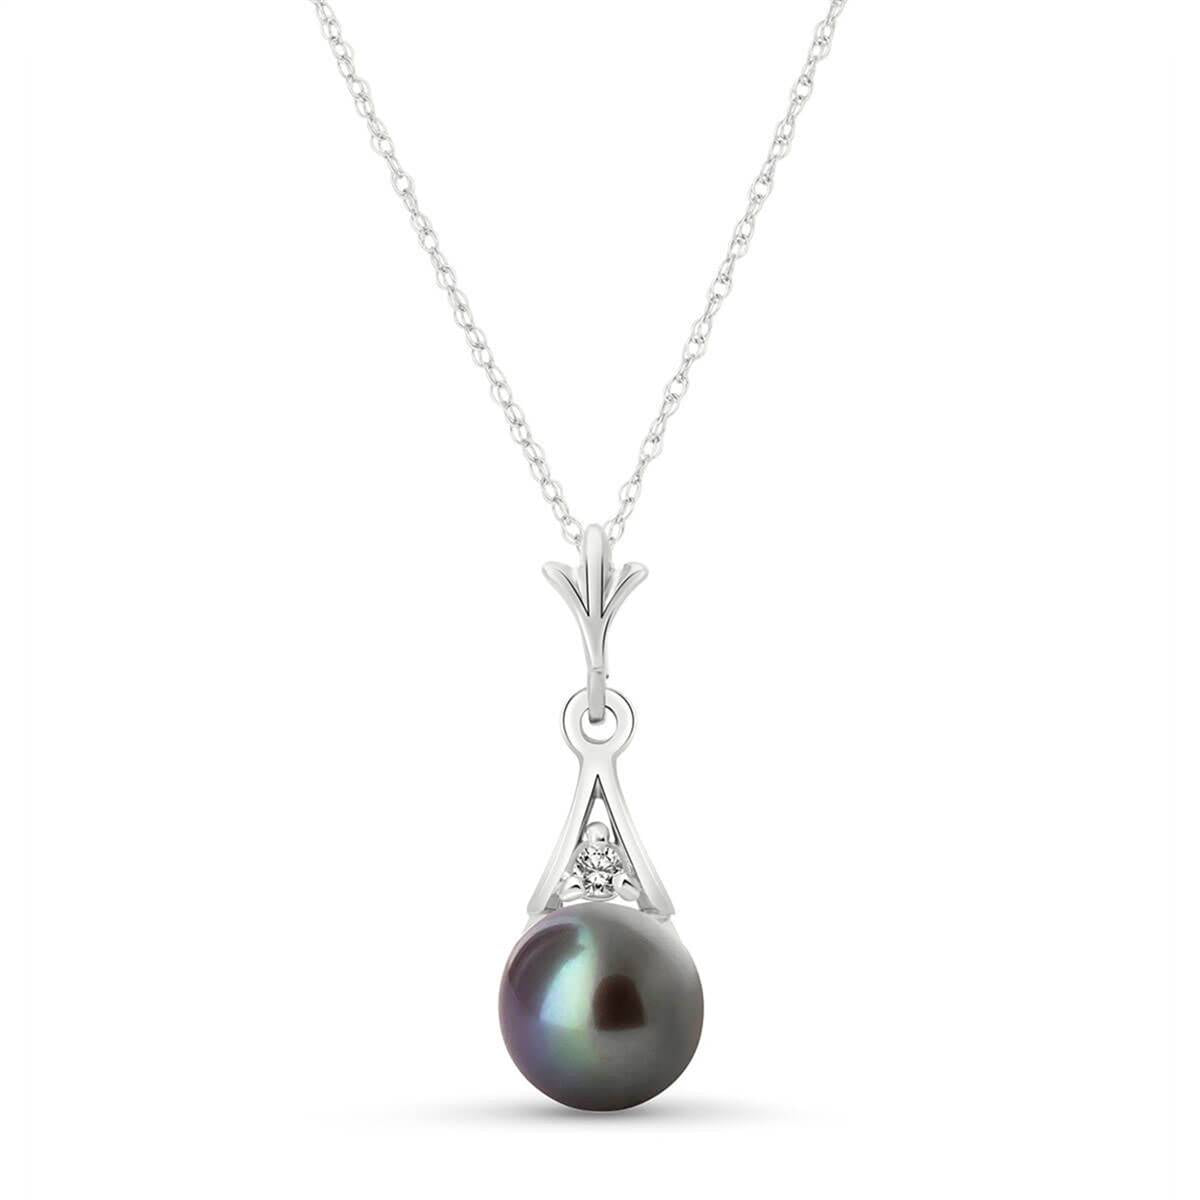 2.03 Carat 14K Solid White Gold Necklace Diamond Black Pearl